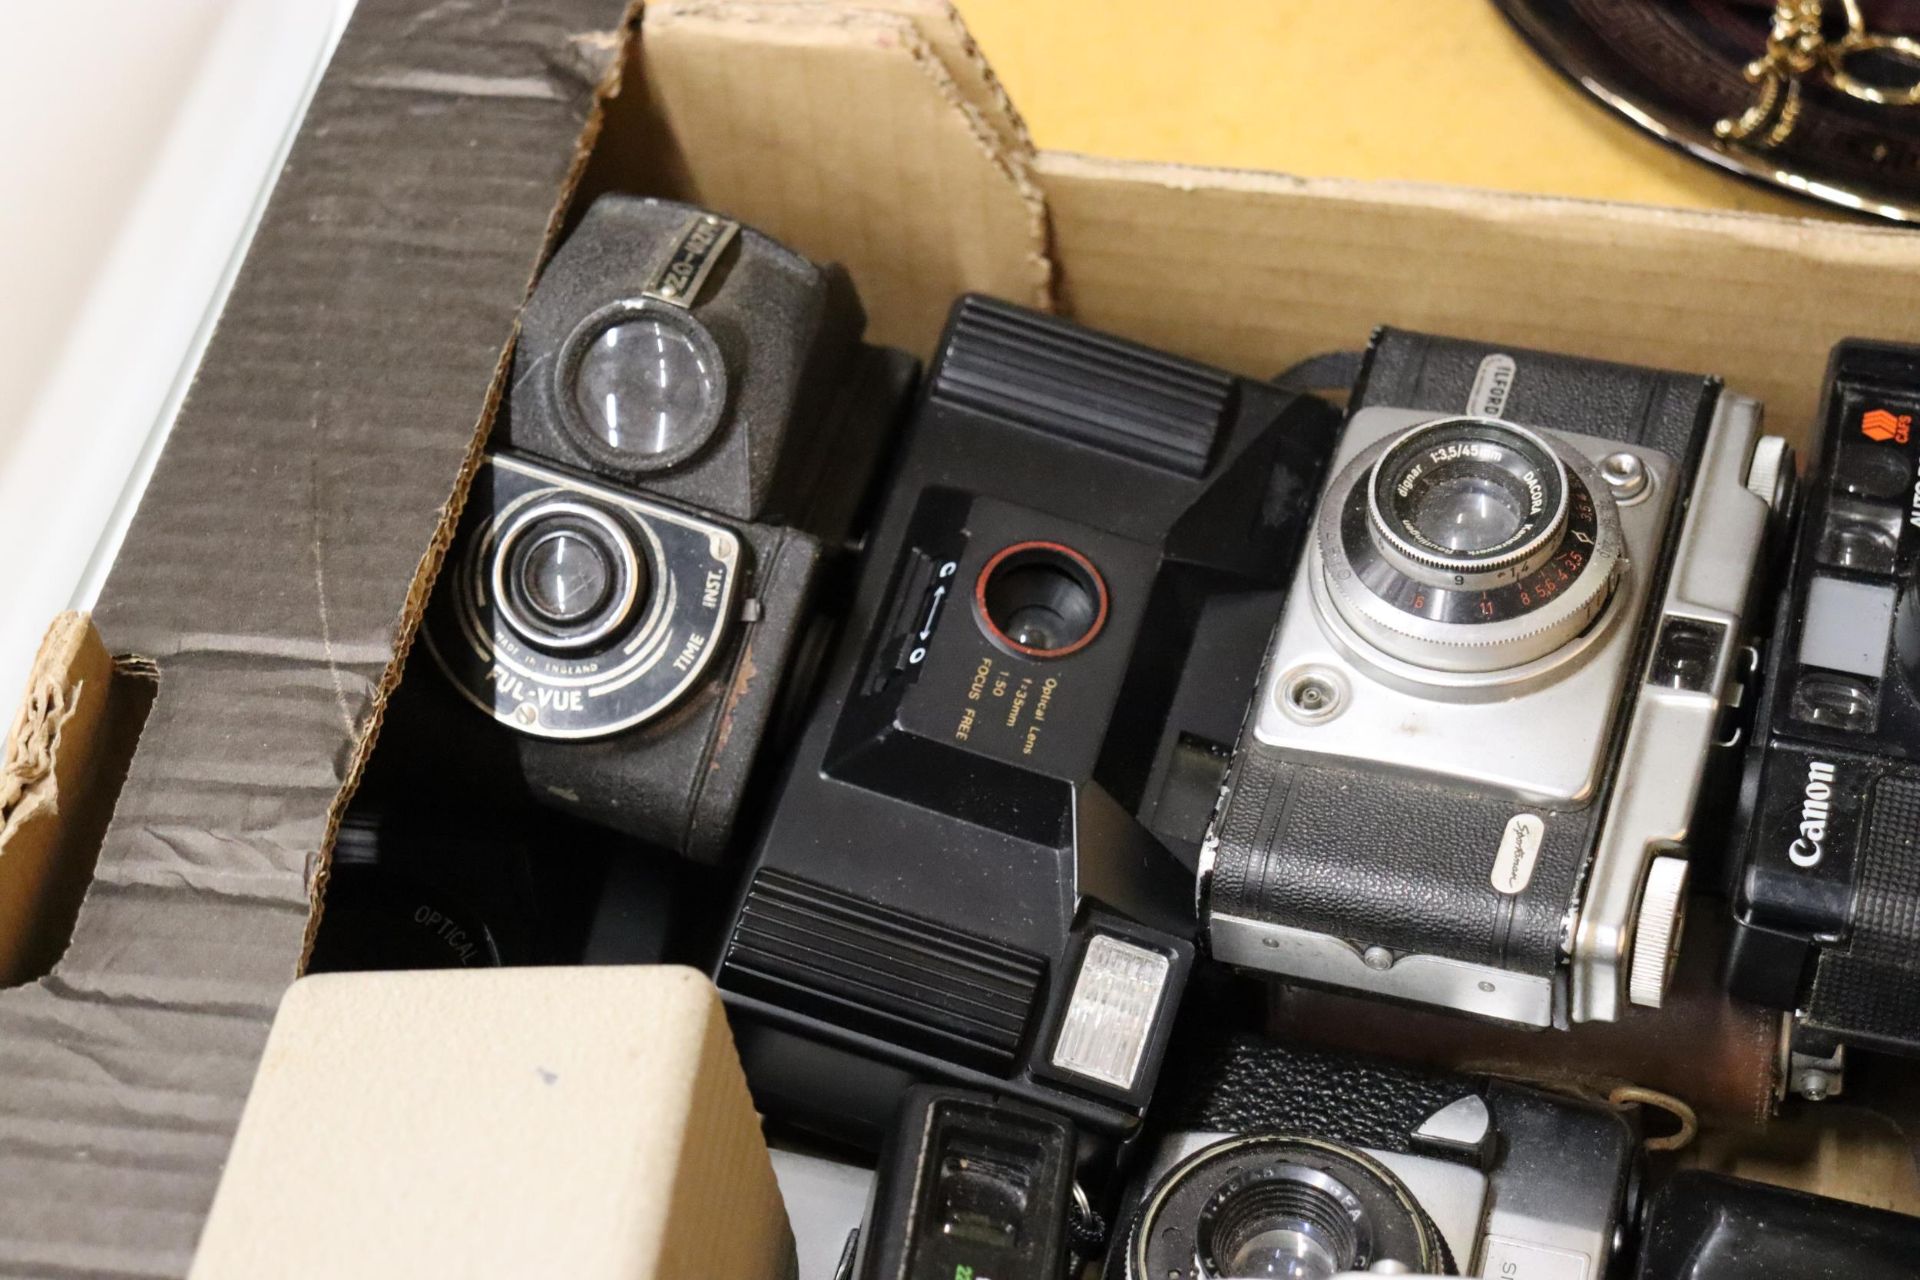 A LARGE QUANTITY OF VINTAGE CAMERAS TO INCLUDE CANON, ENSIGN, KODAK BROWNIE, ETC - 26 IN TOTAL - Image 3 of 9